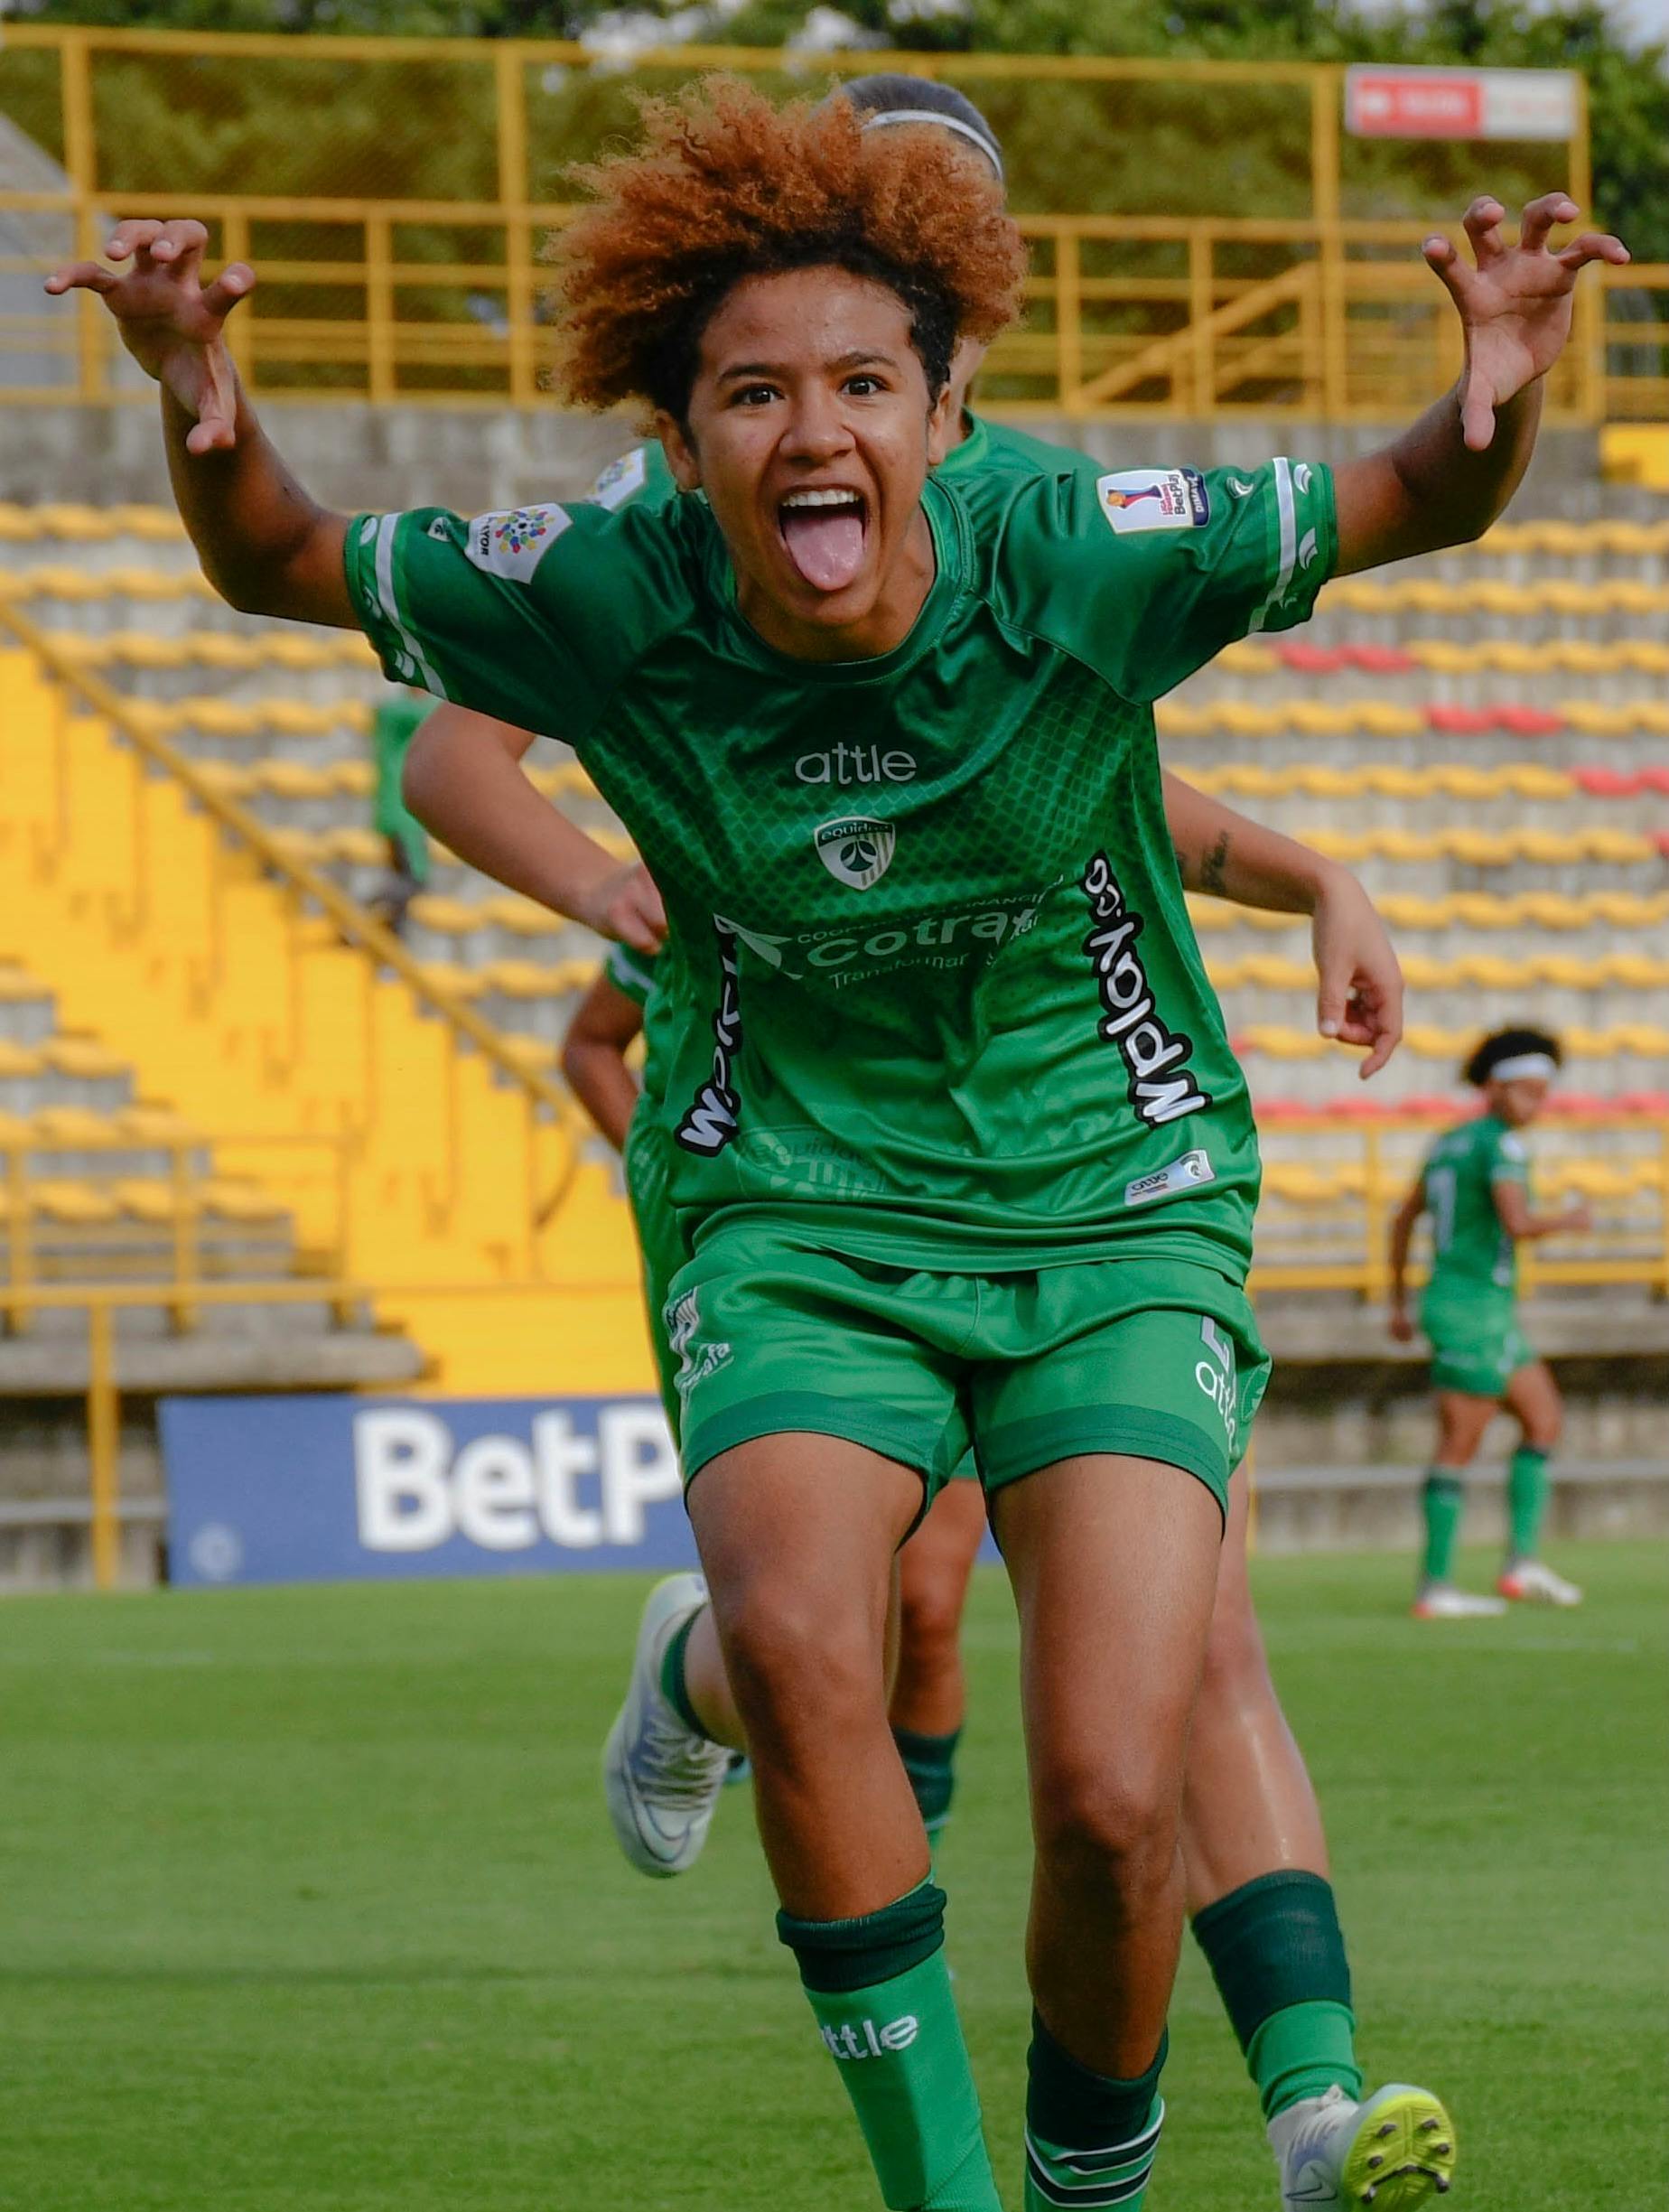 woman soccer player cheering during a match